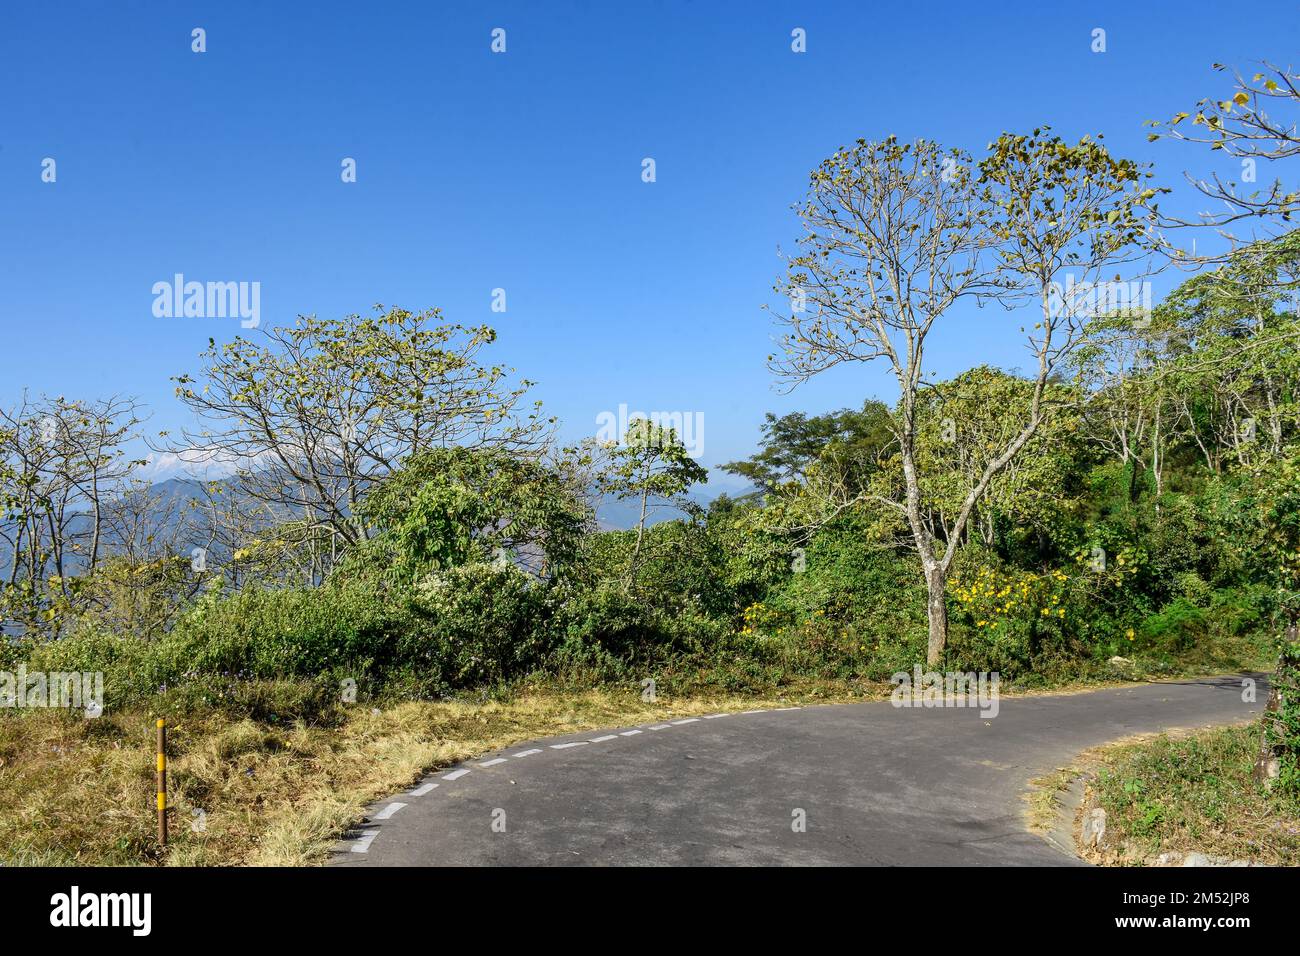 Landscape with mountains, curving road and panoramic view of Mt. Kanchenjunga from Kalimpong. Stock Photo